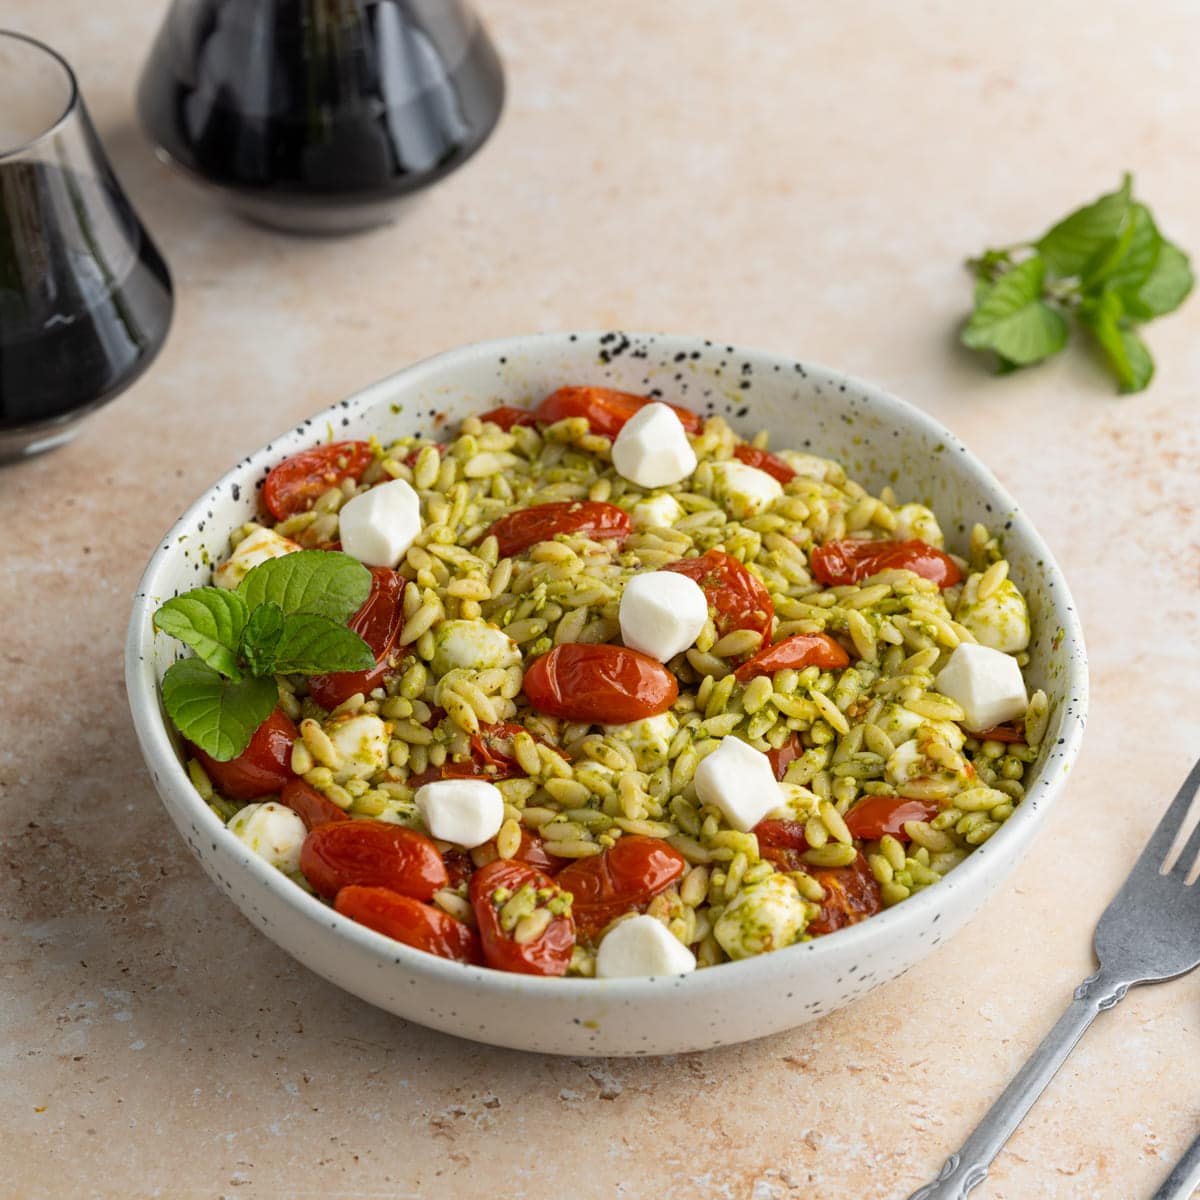 Orzo Pesto Salad with roasted tomatoes and mozzarella pearls